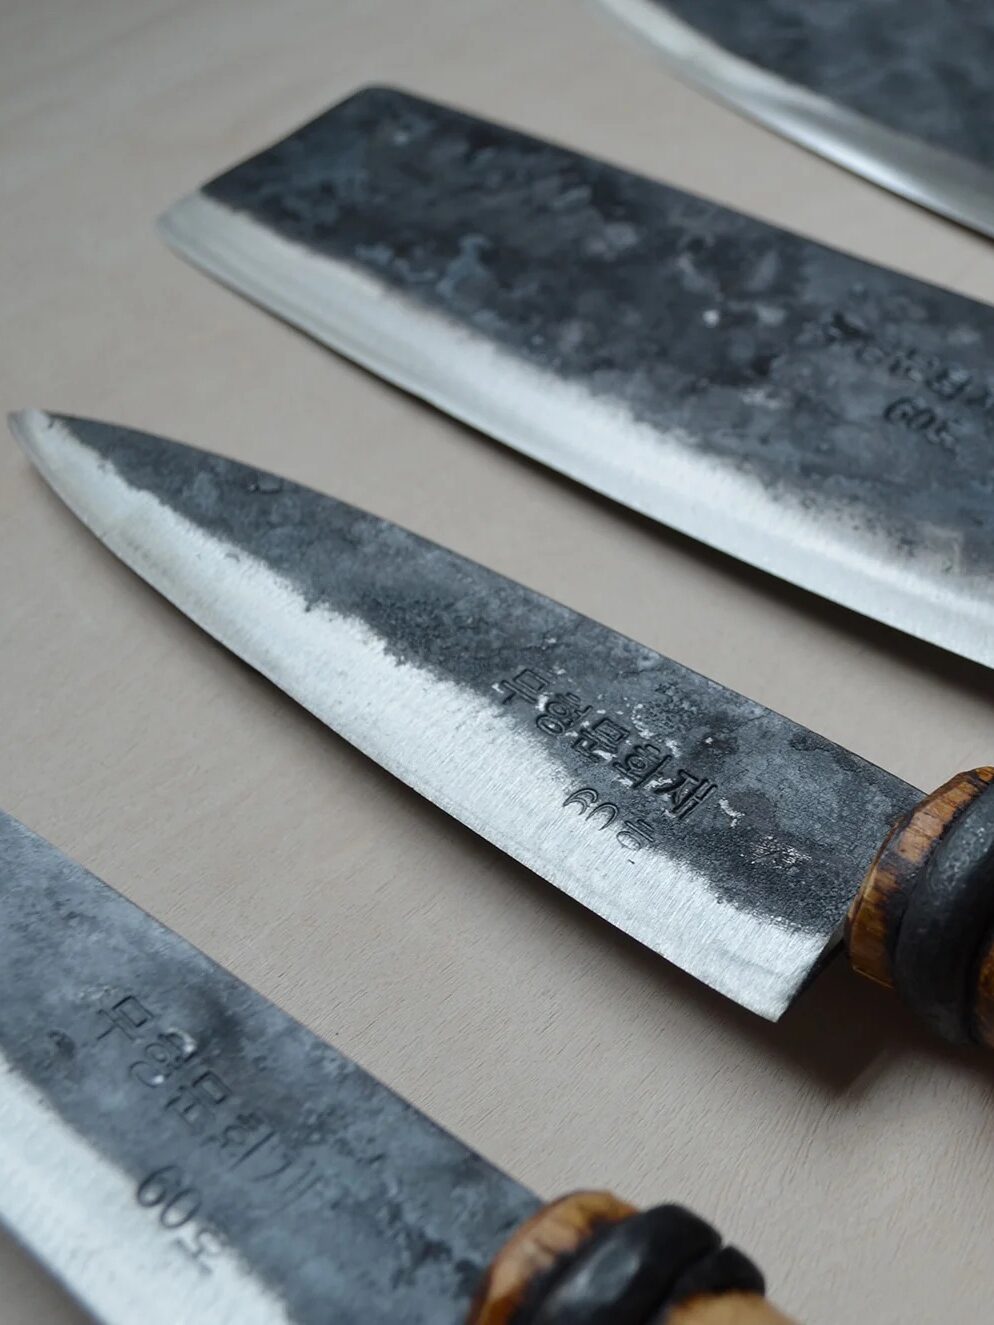 Three rustic kitchen knives with wooden handles and inscribed blades, displayed on a wooden surface.